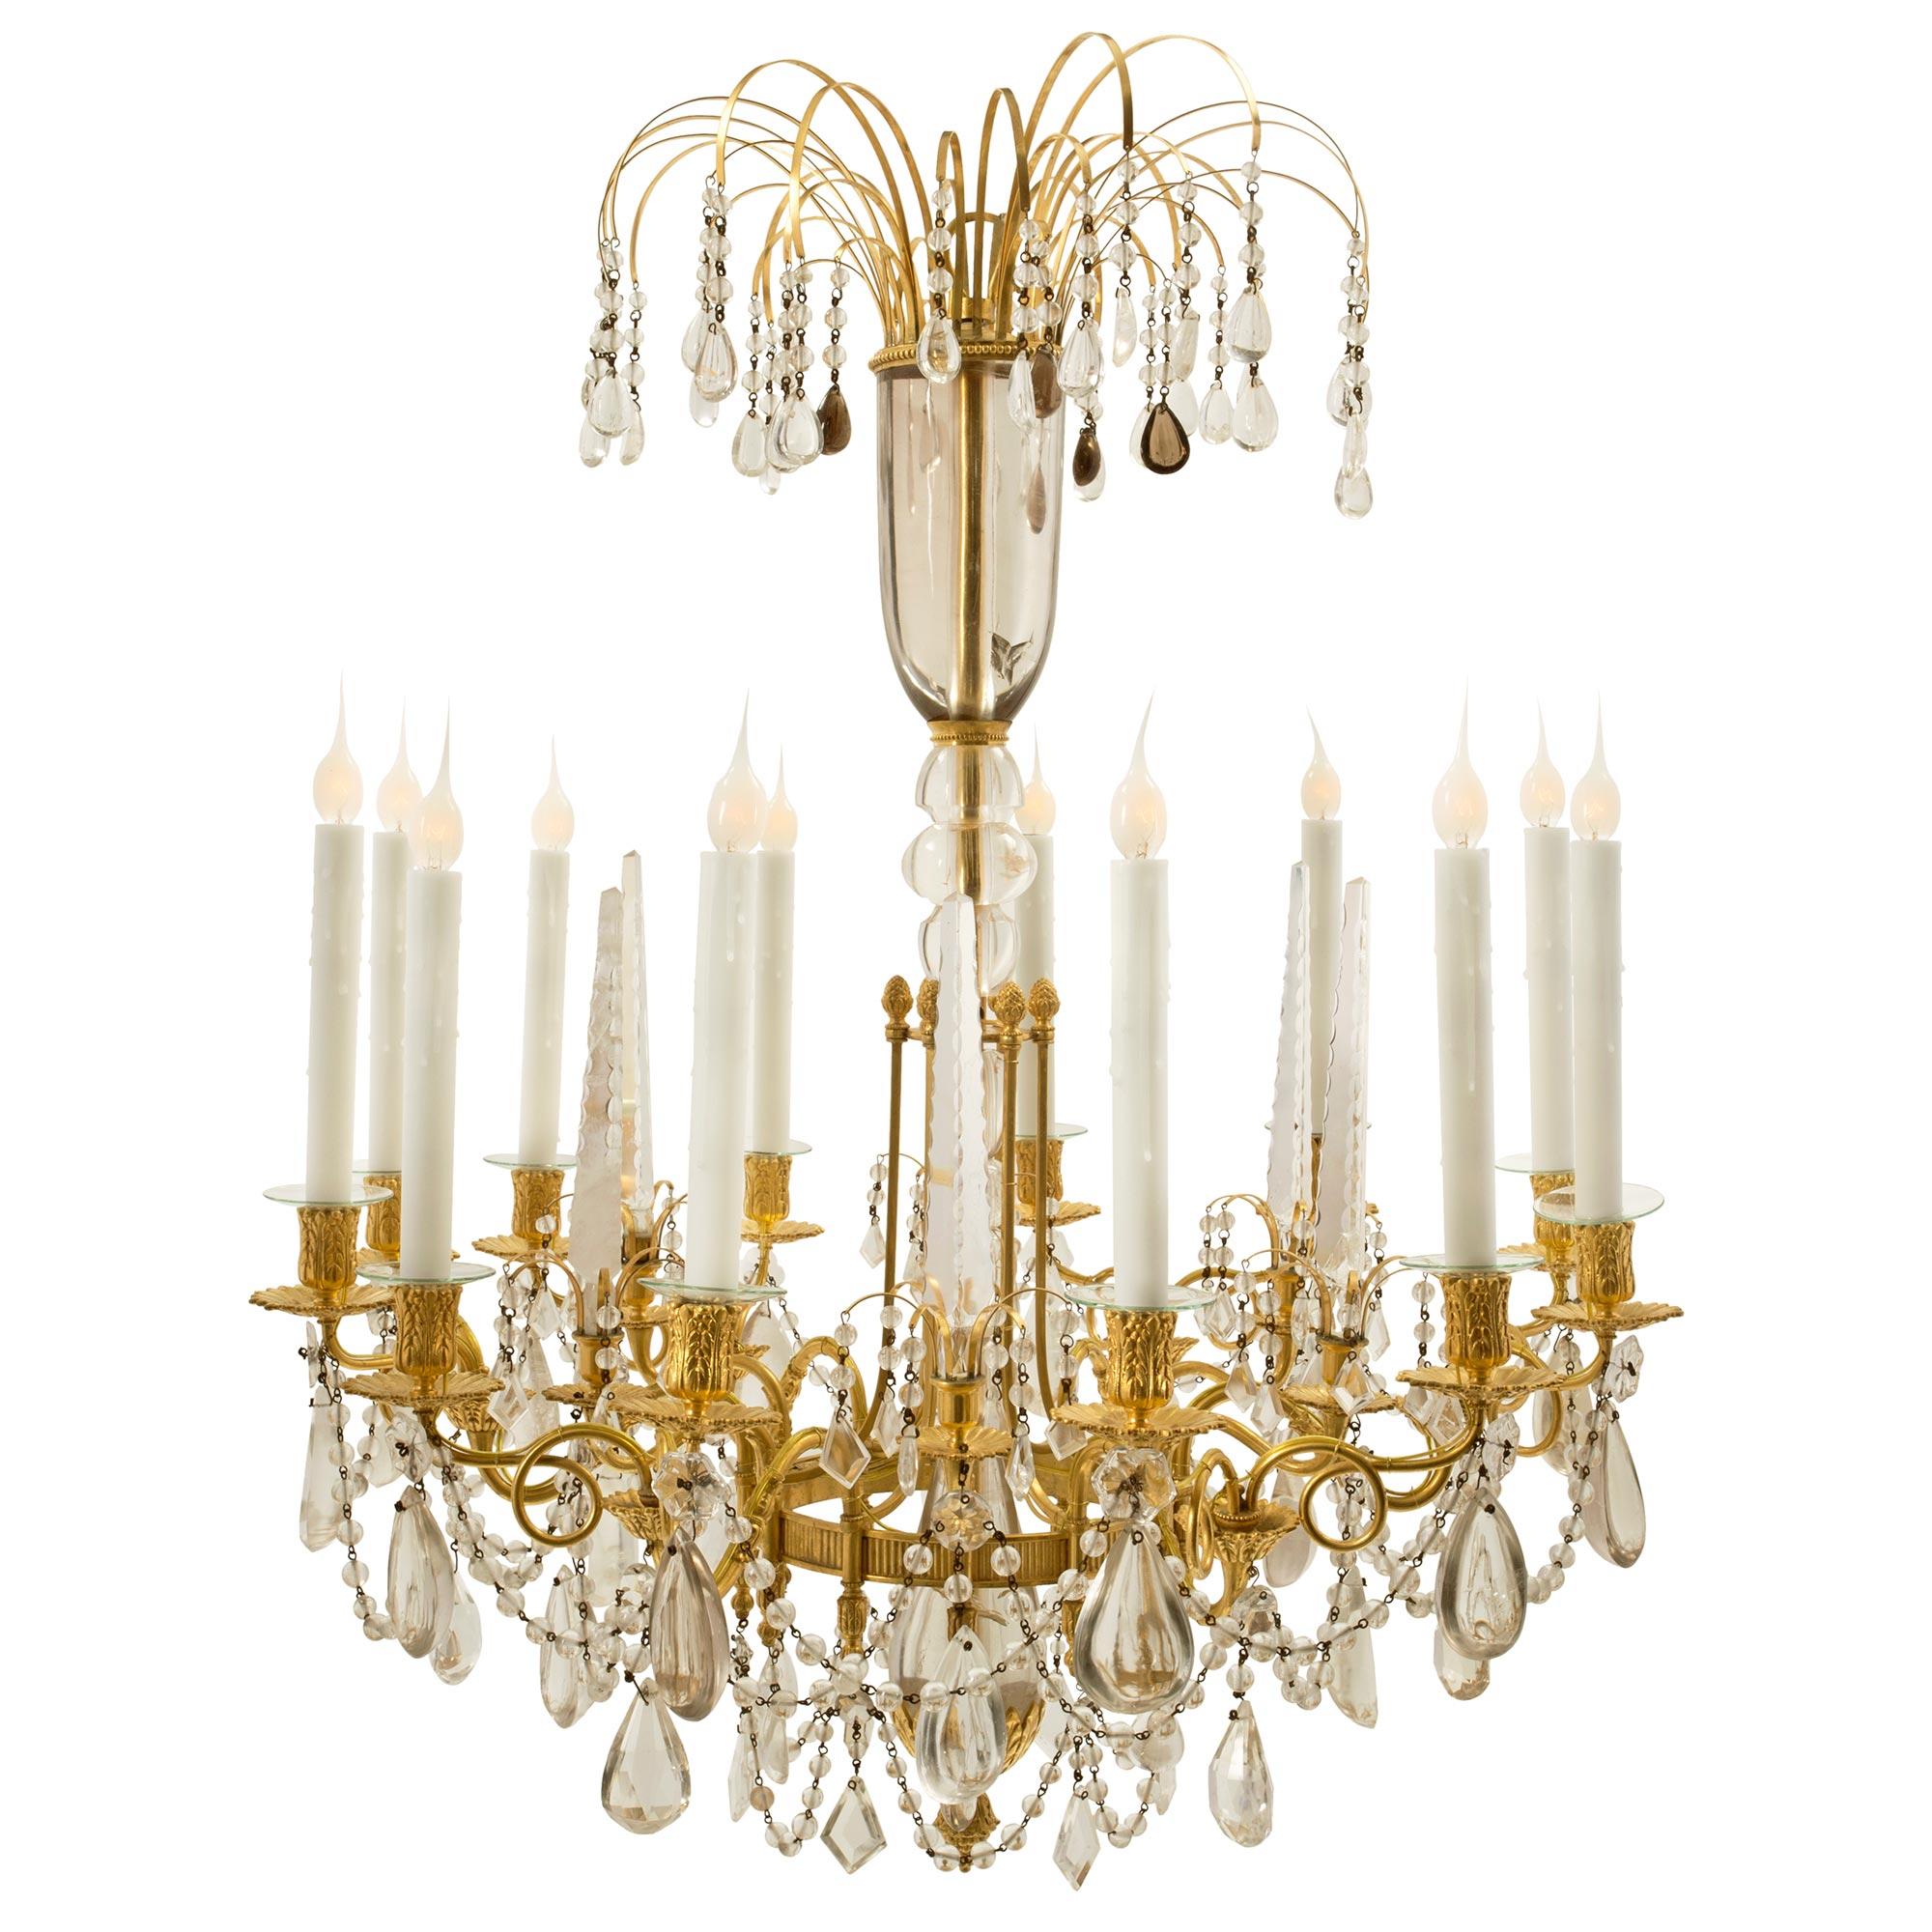 Russian Imperial 19th Century Neoclassical Style Rock Crystal Chandelier For Sale